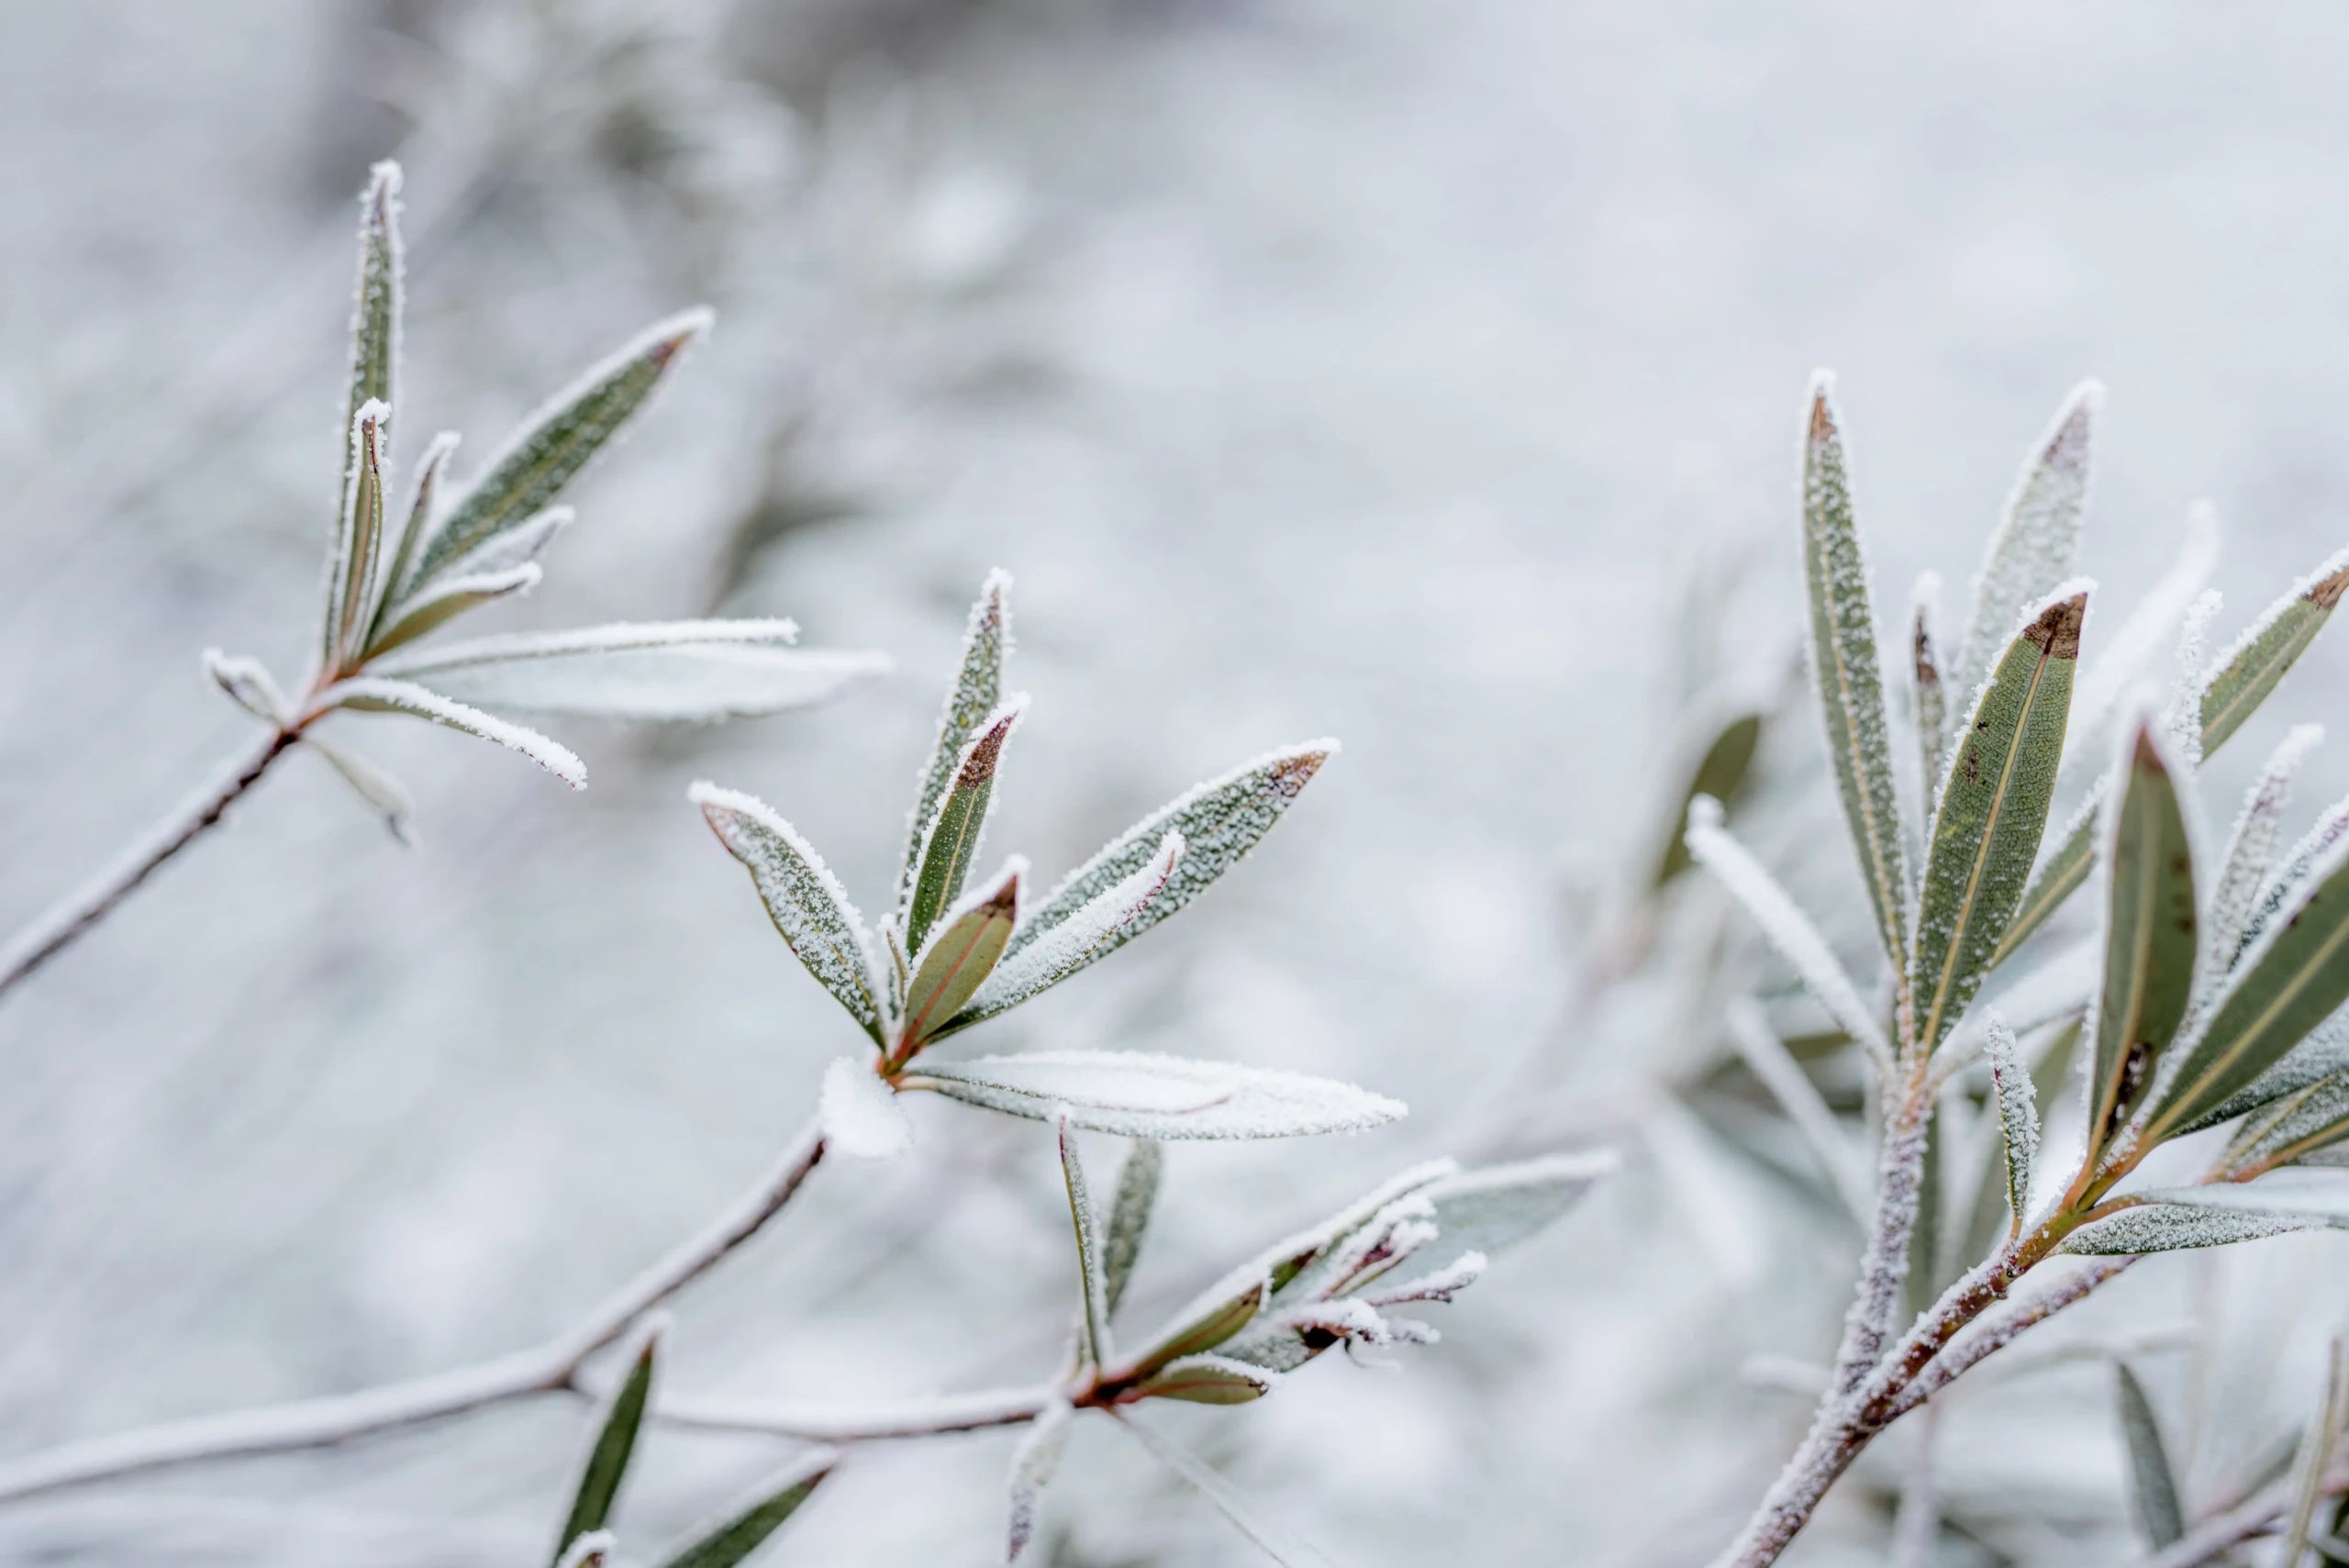 A close-up of a tree branch with leaves covered in snow